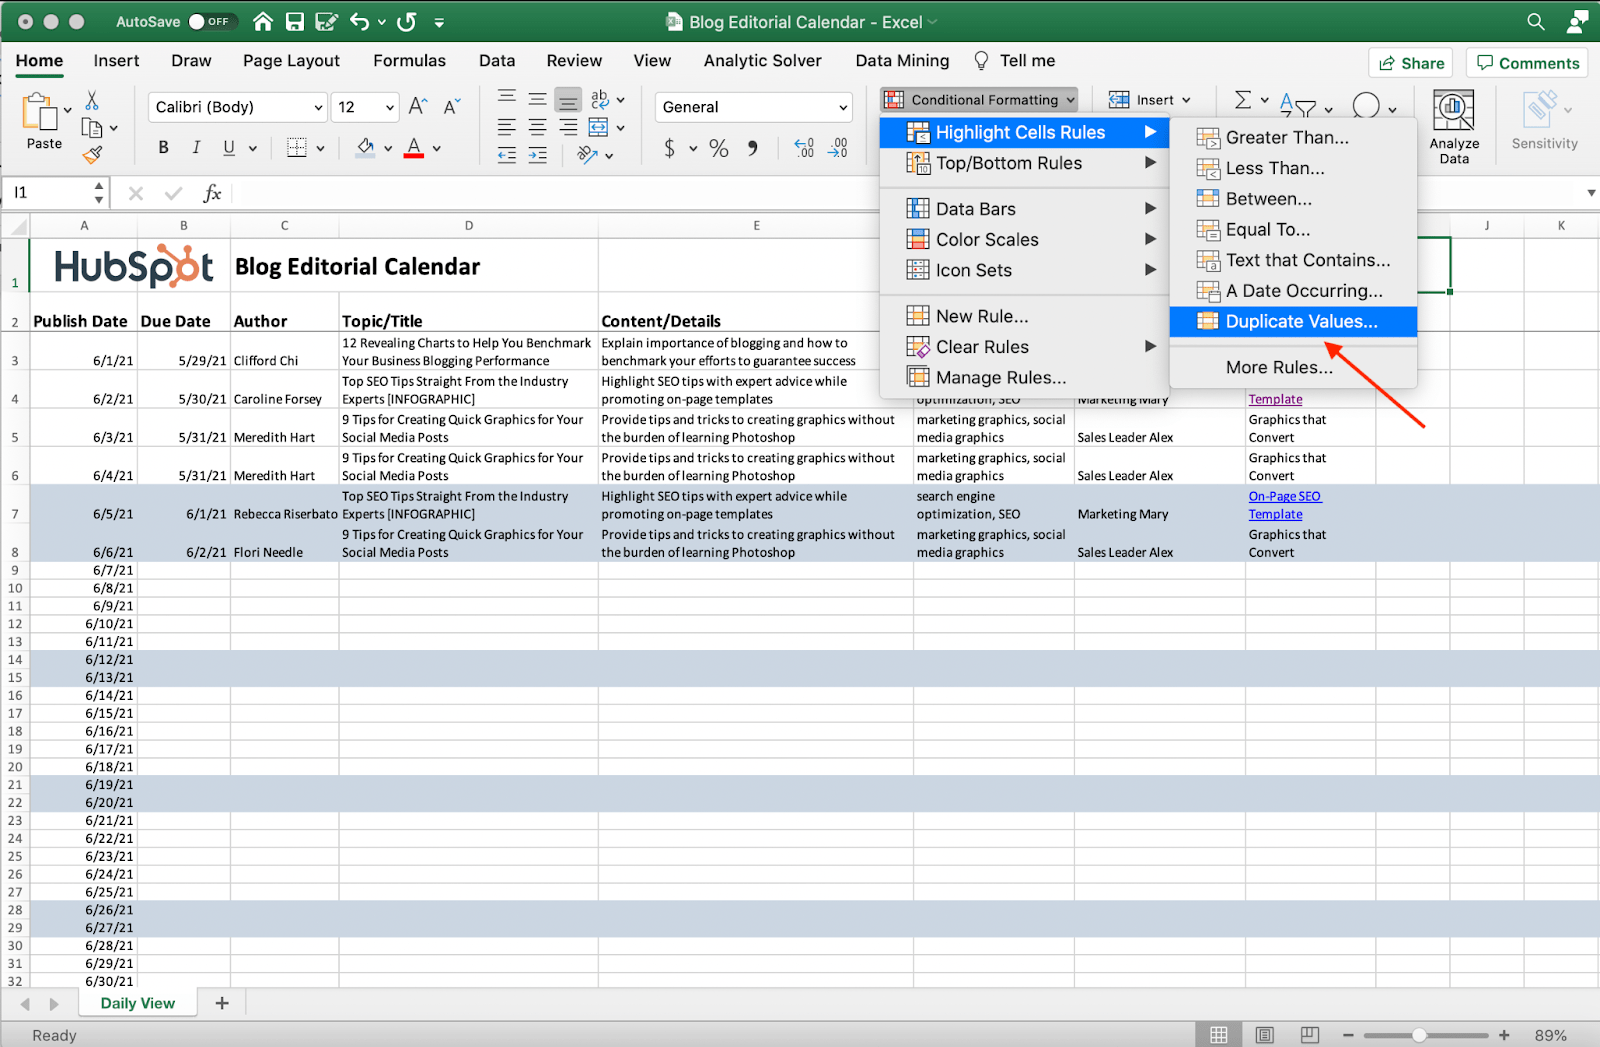 Screenshot of removing duplicate values in Excel.